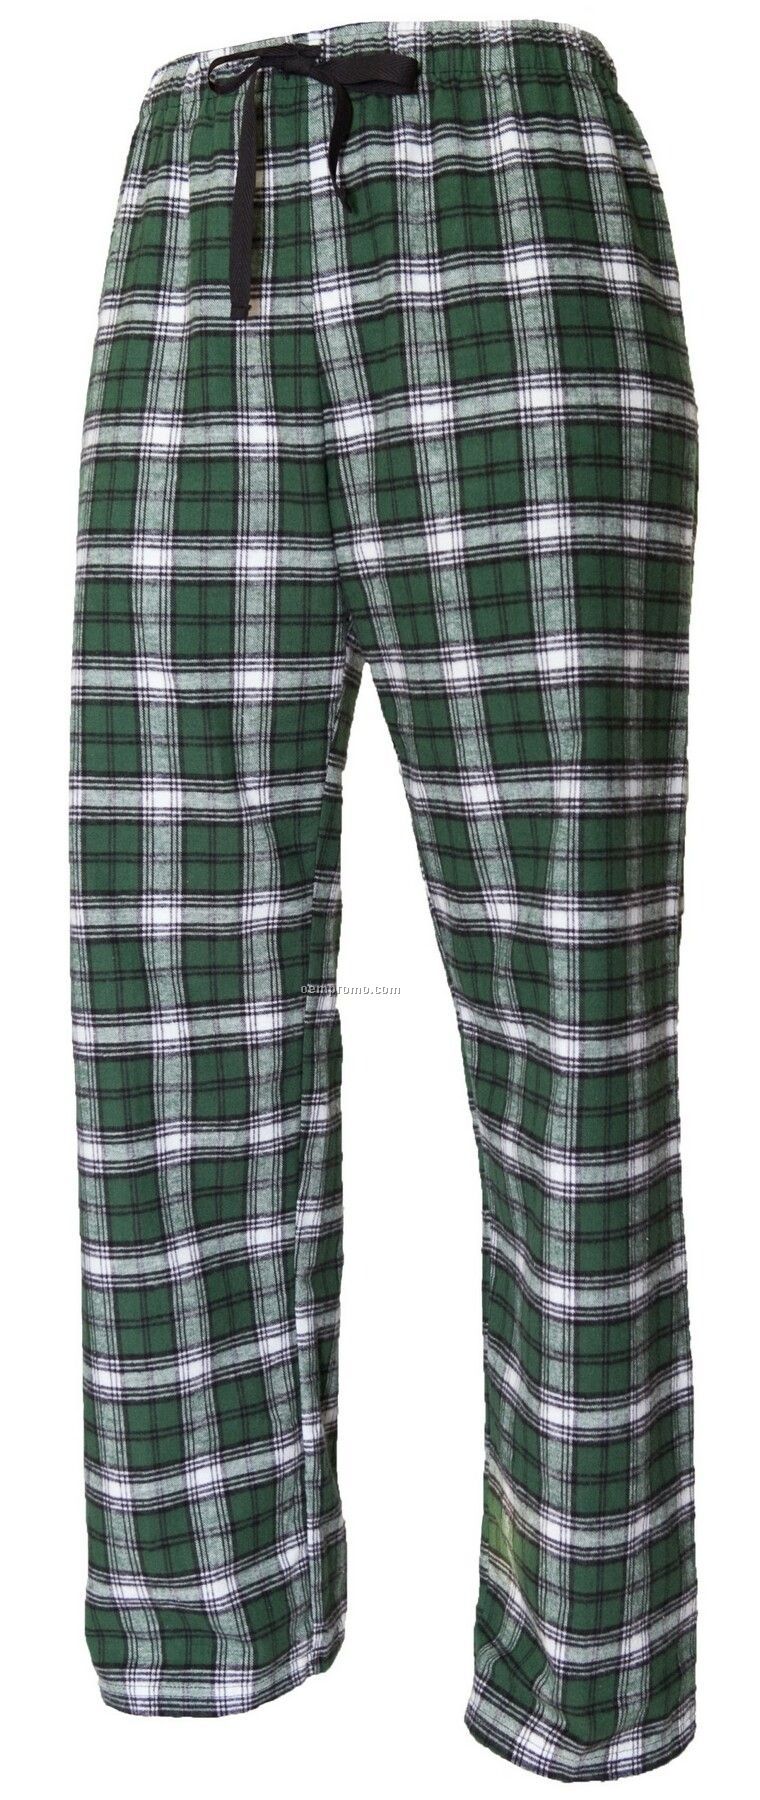 Adult Team Pride Flannel Pant In Green & White Plaid